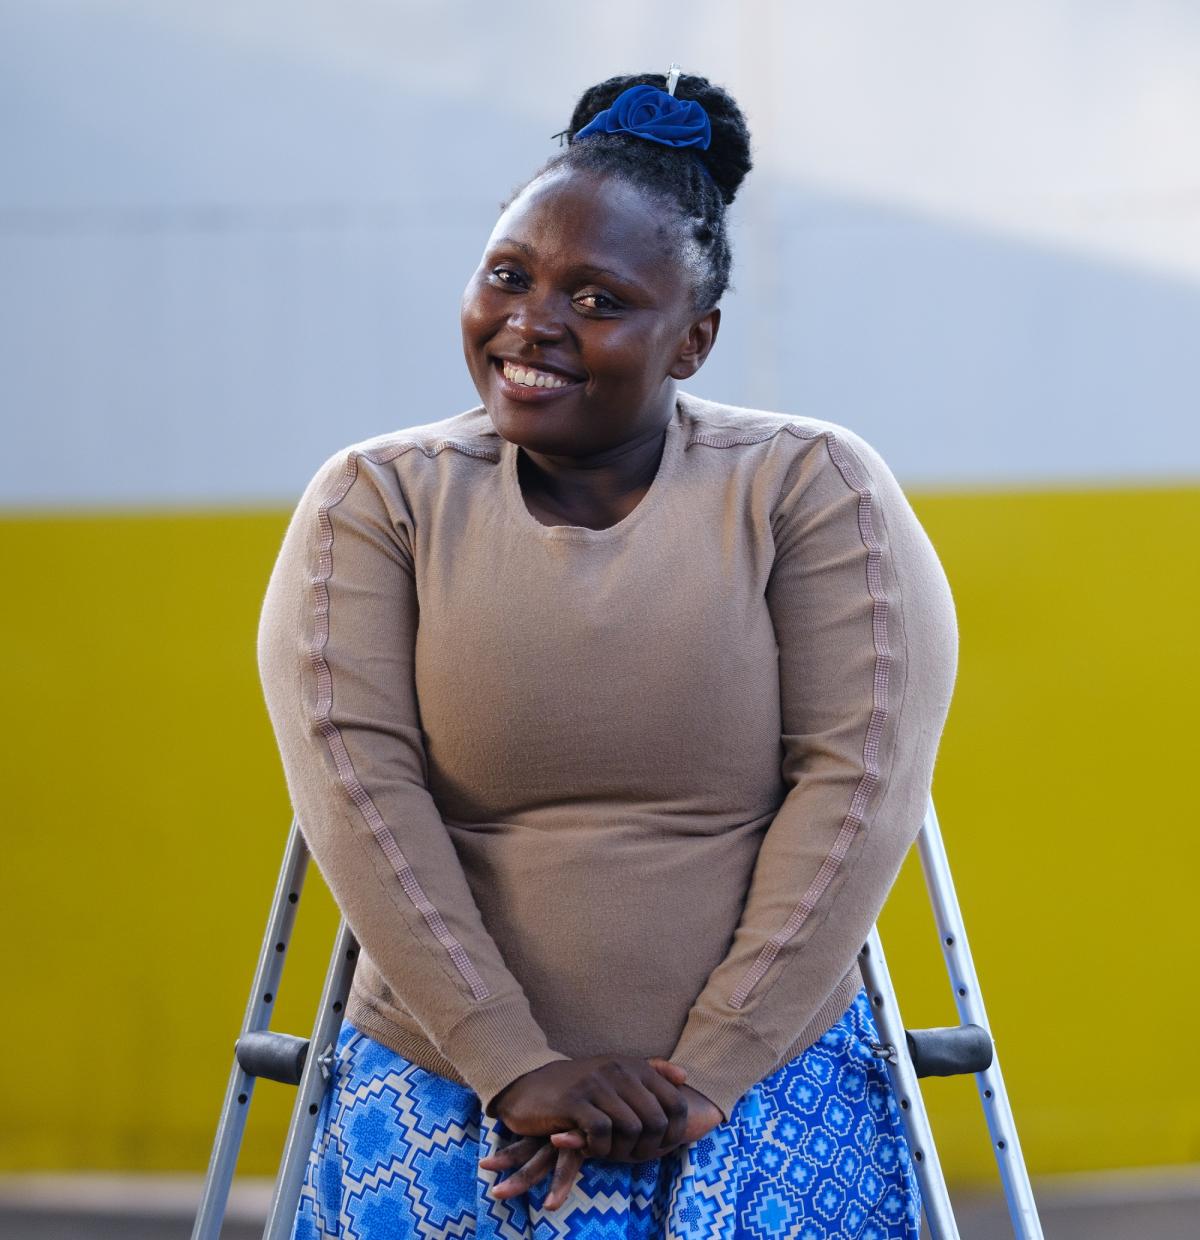 Dorcus Kabahenda, a 33-year-old Ugandan woman leaning on her crutches. she is smiling and wears a lightbrown sweater and a blue skirt